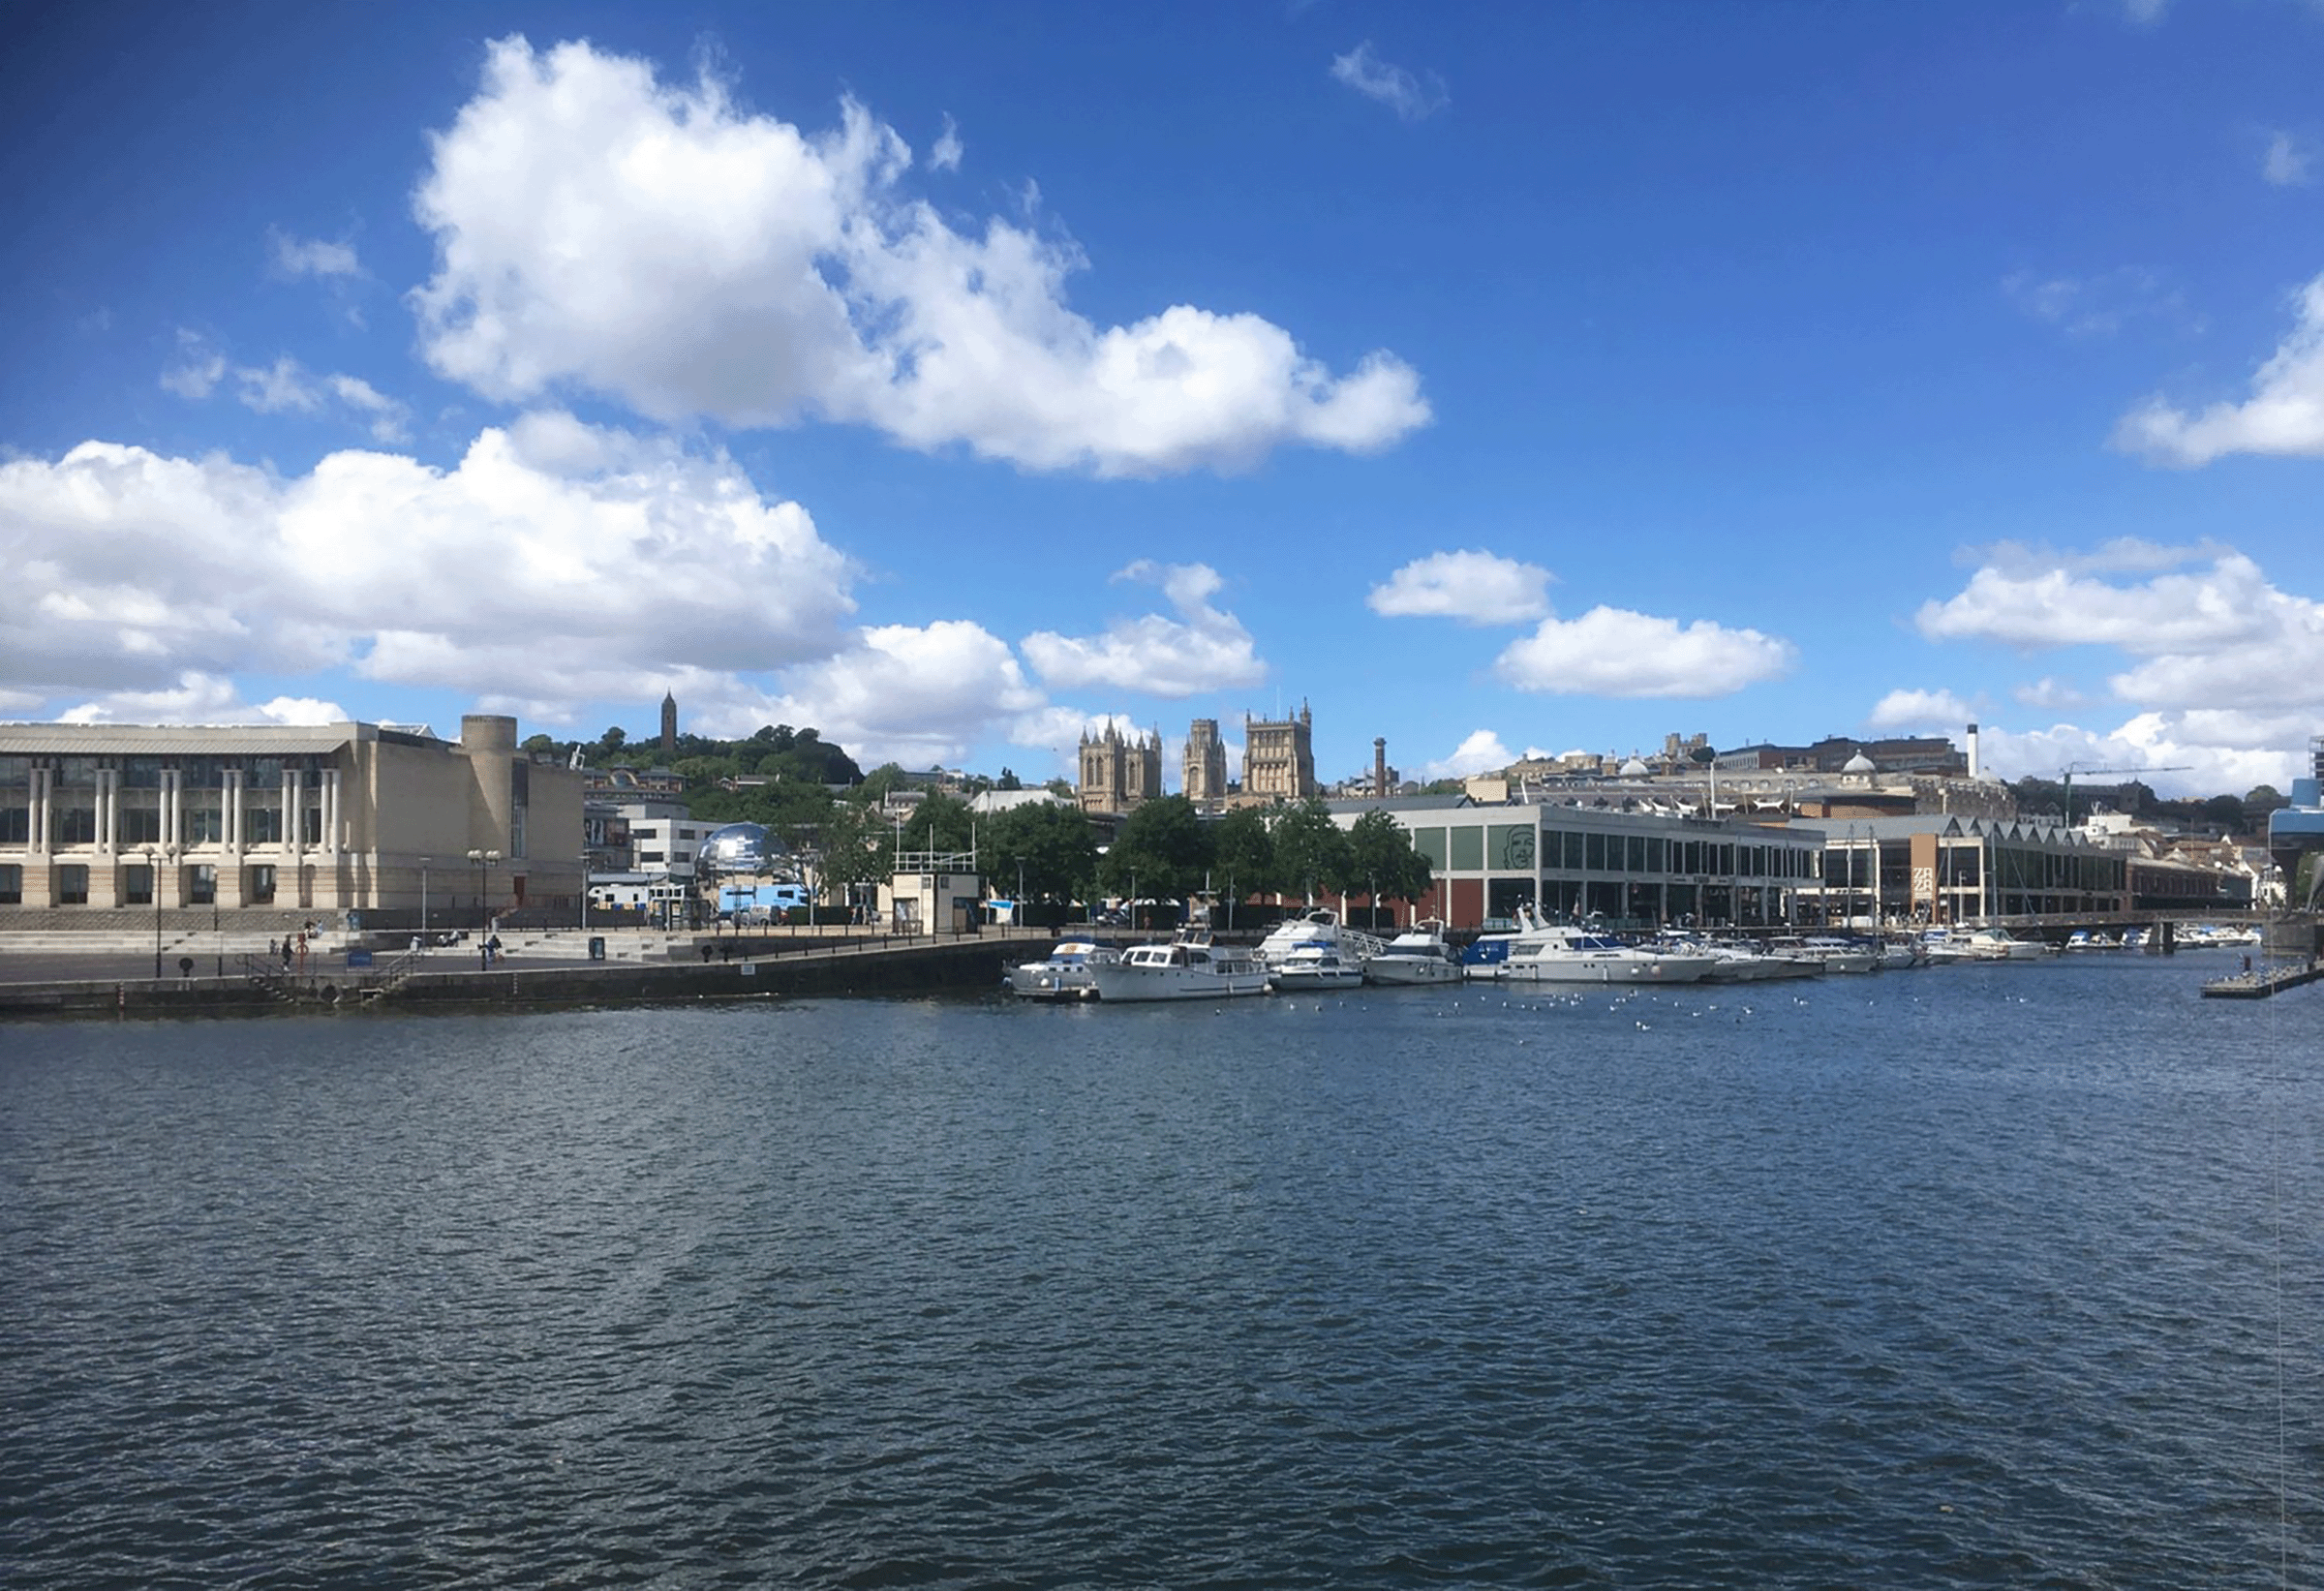 A view across the river towards Bristol's harbourside buildings. The towers of Bristol Cathedral can be seen rising above in the middle ground.